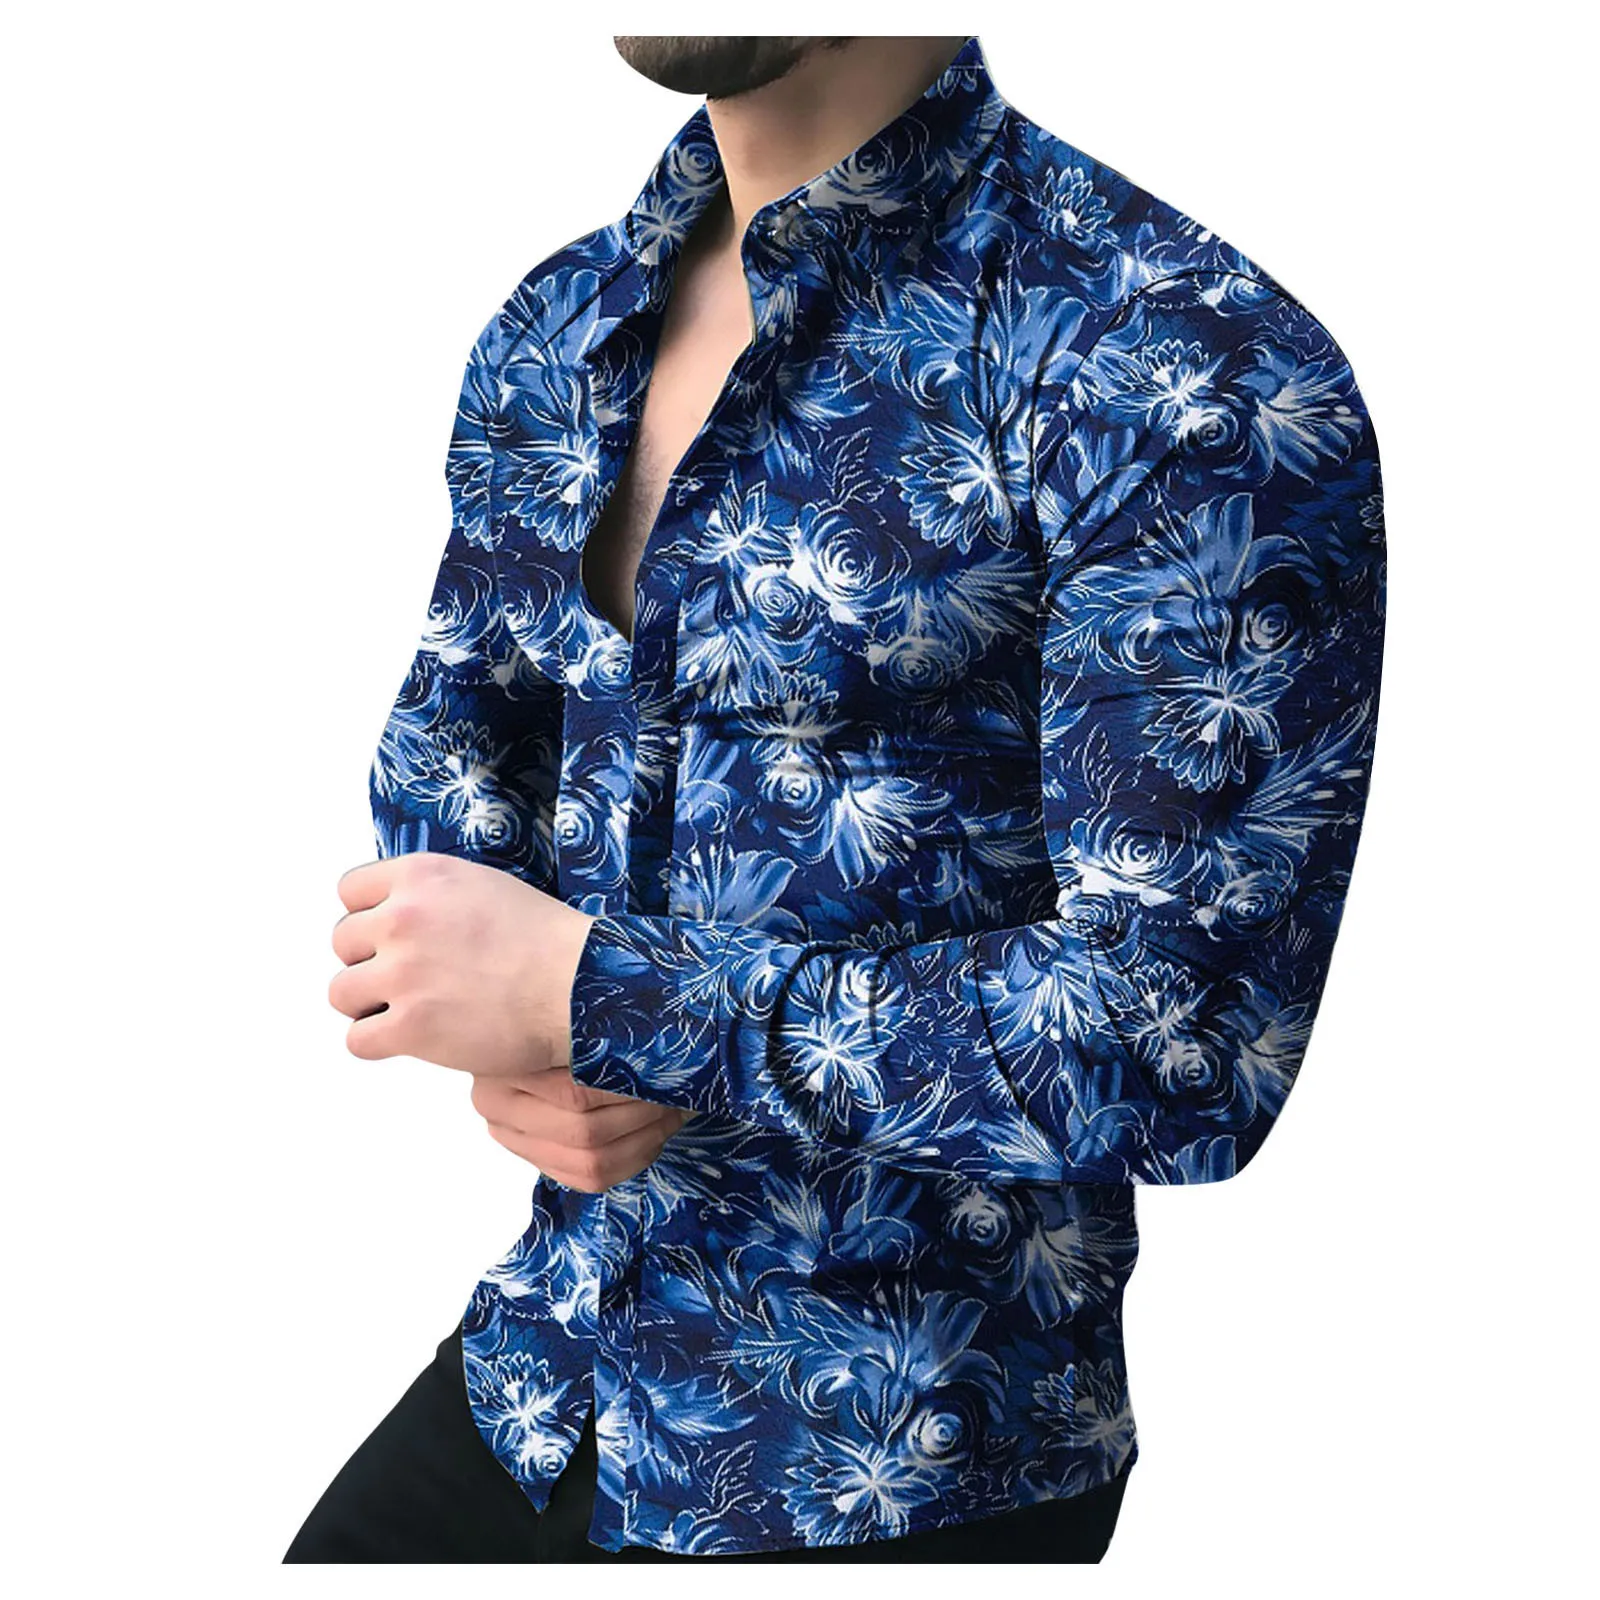 

Feitong Streetwear Men Tops Floral Shirts For Men Casual Long Sleeve Shirt Buttons Down Slim Shirt Blusas Male Camisas